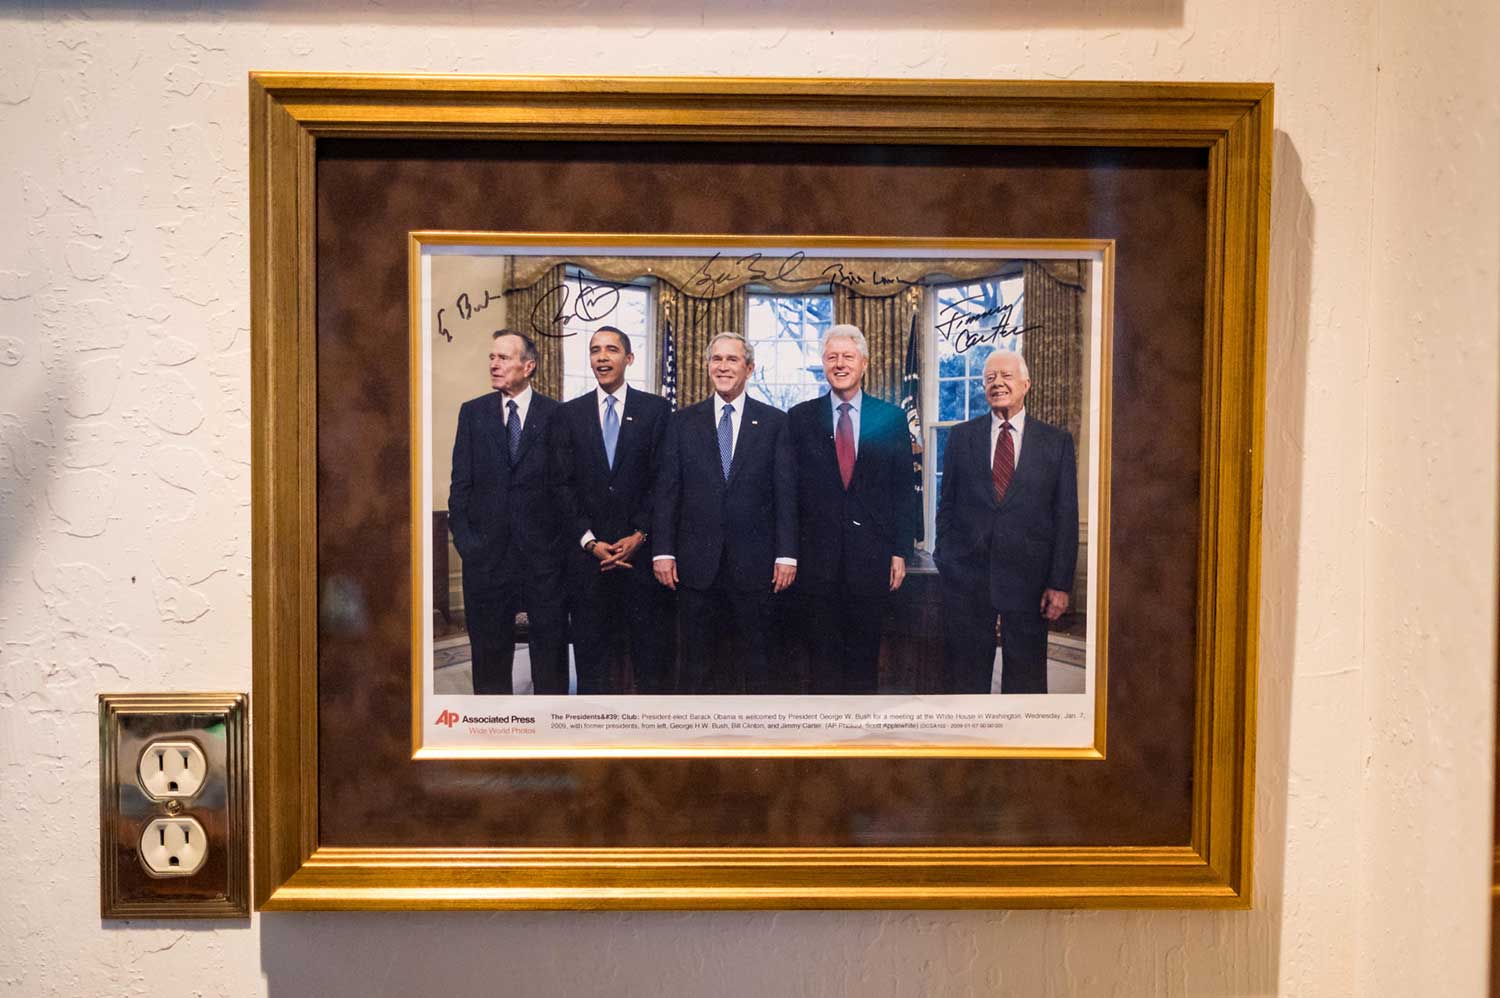 A framed photo of President Barack Obama being welcomed to the White House by President George W. Bush and joined by former presidents George H.W. Bush, Bill Clinton, and Jimmy Carter. The photo is autographed by all five men.